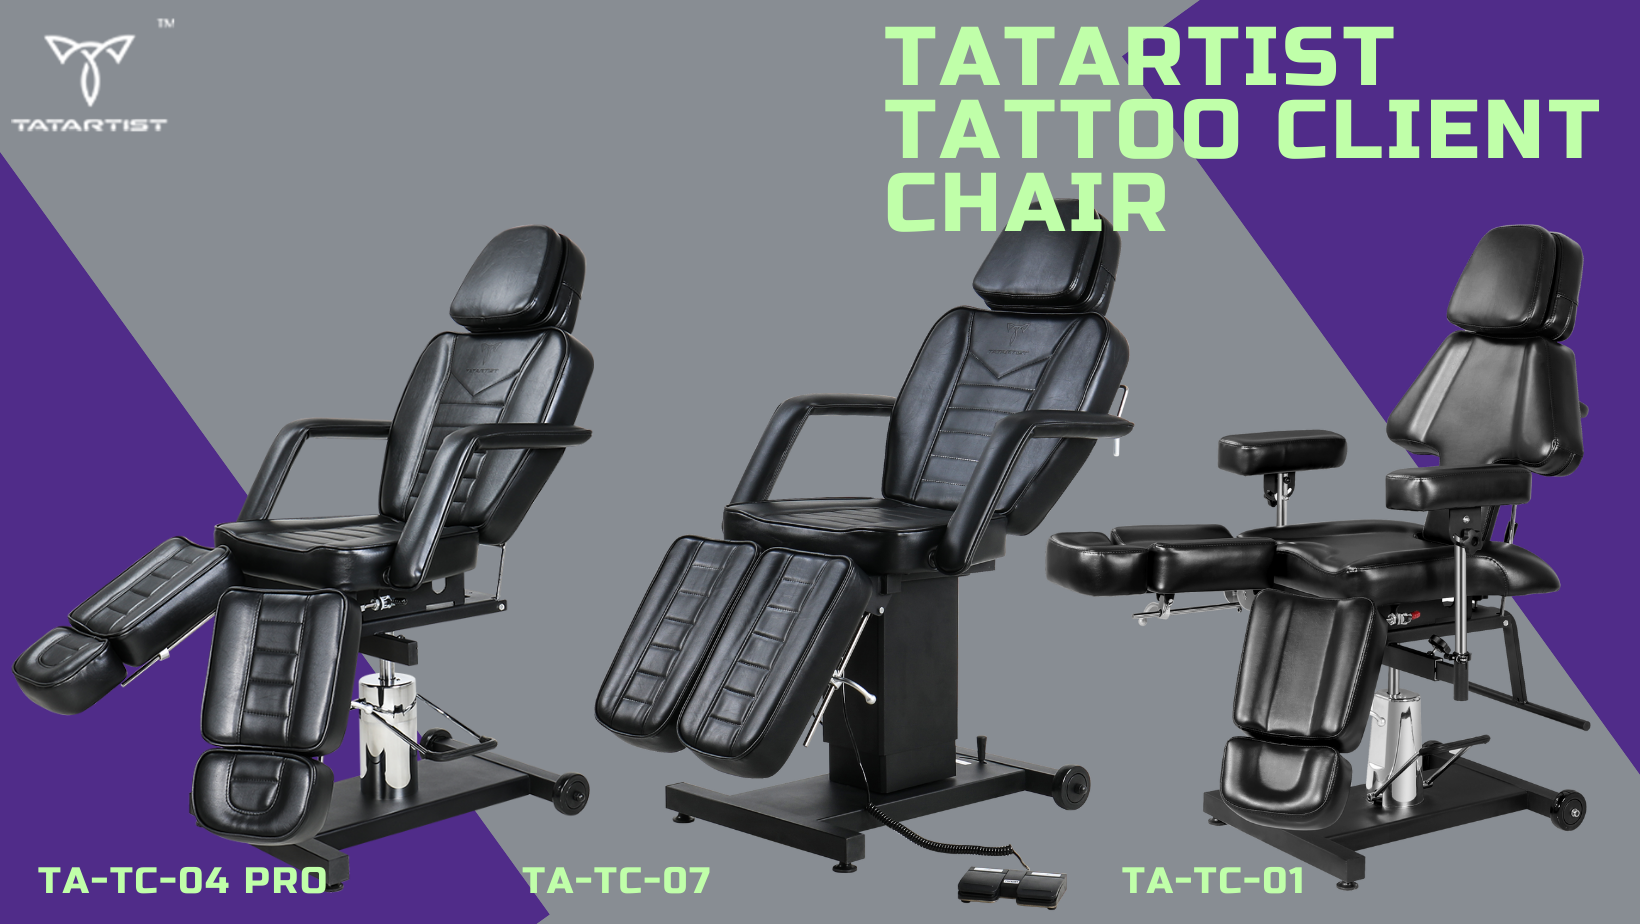 Which tattoo chair is your favorite?